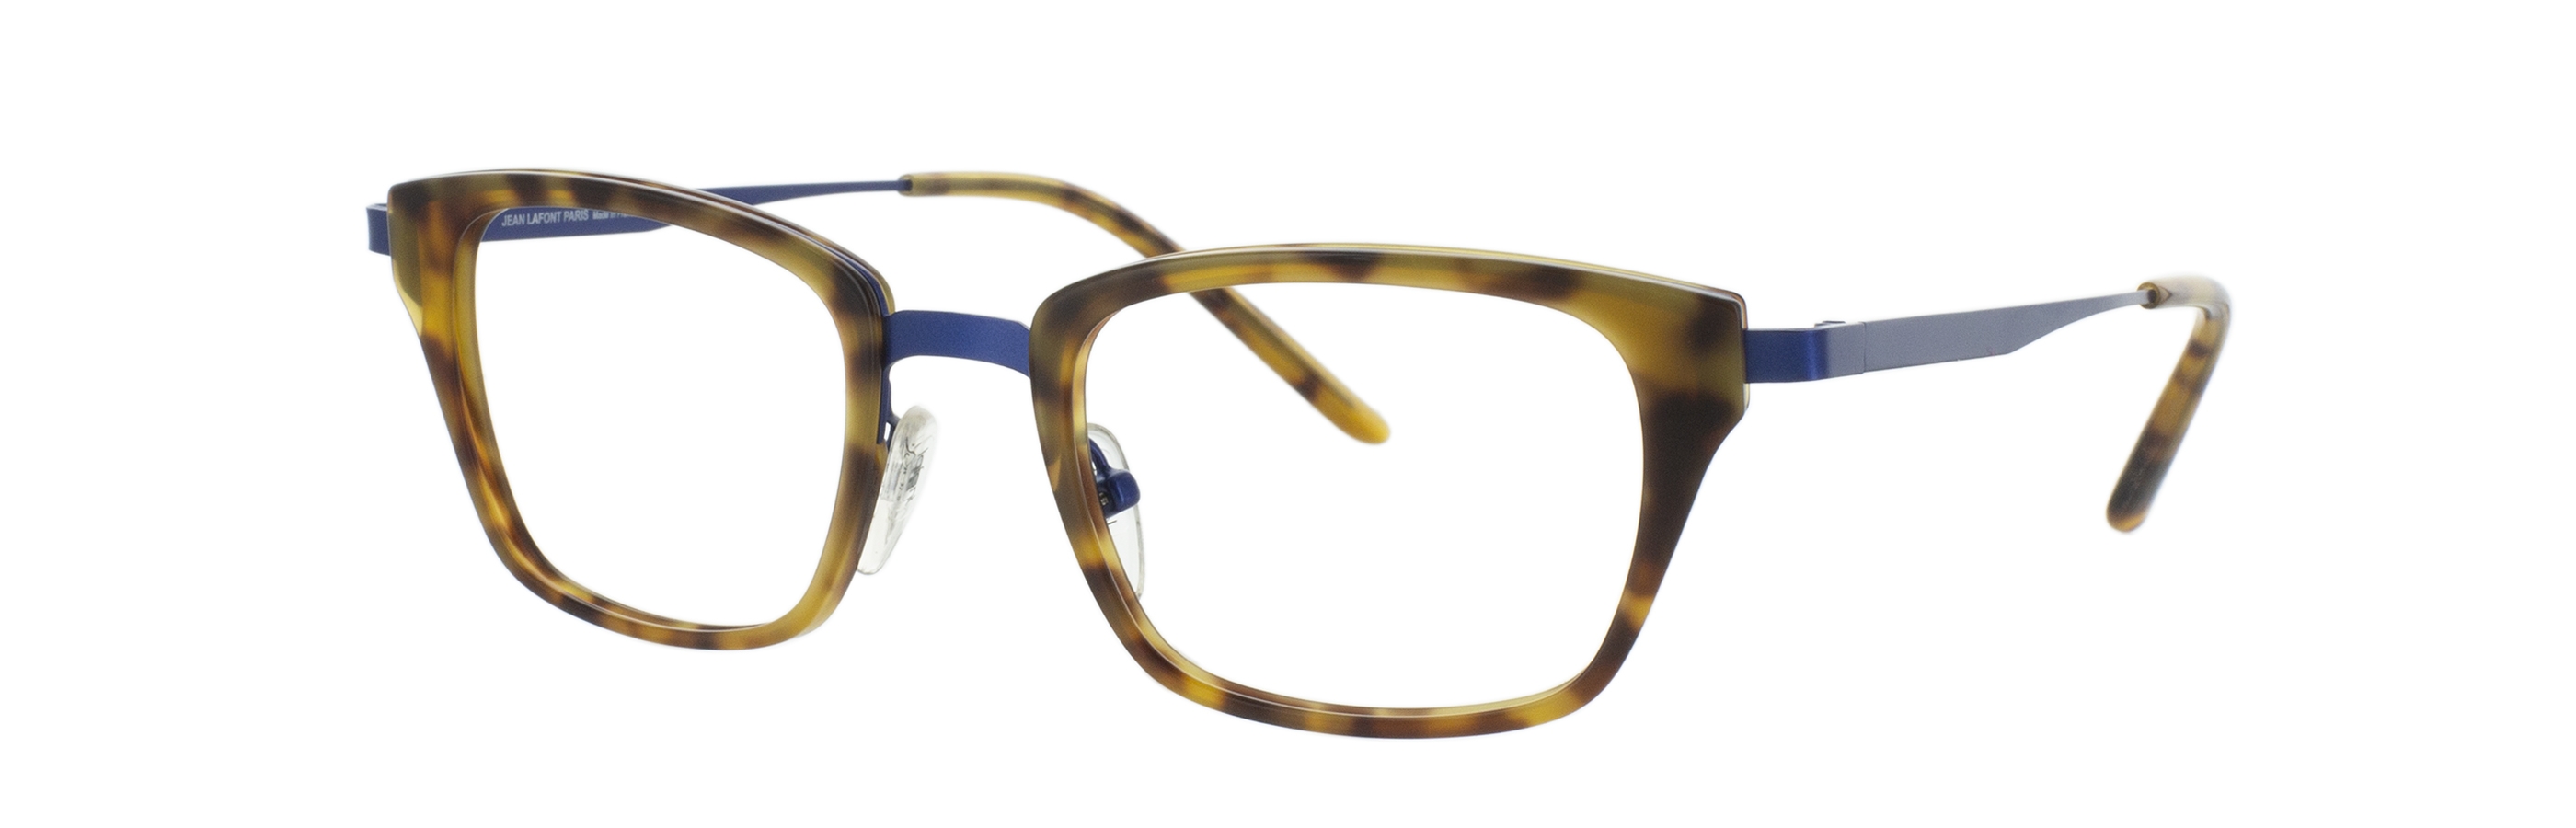 LAFONT GERRY 5156